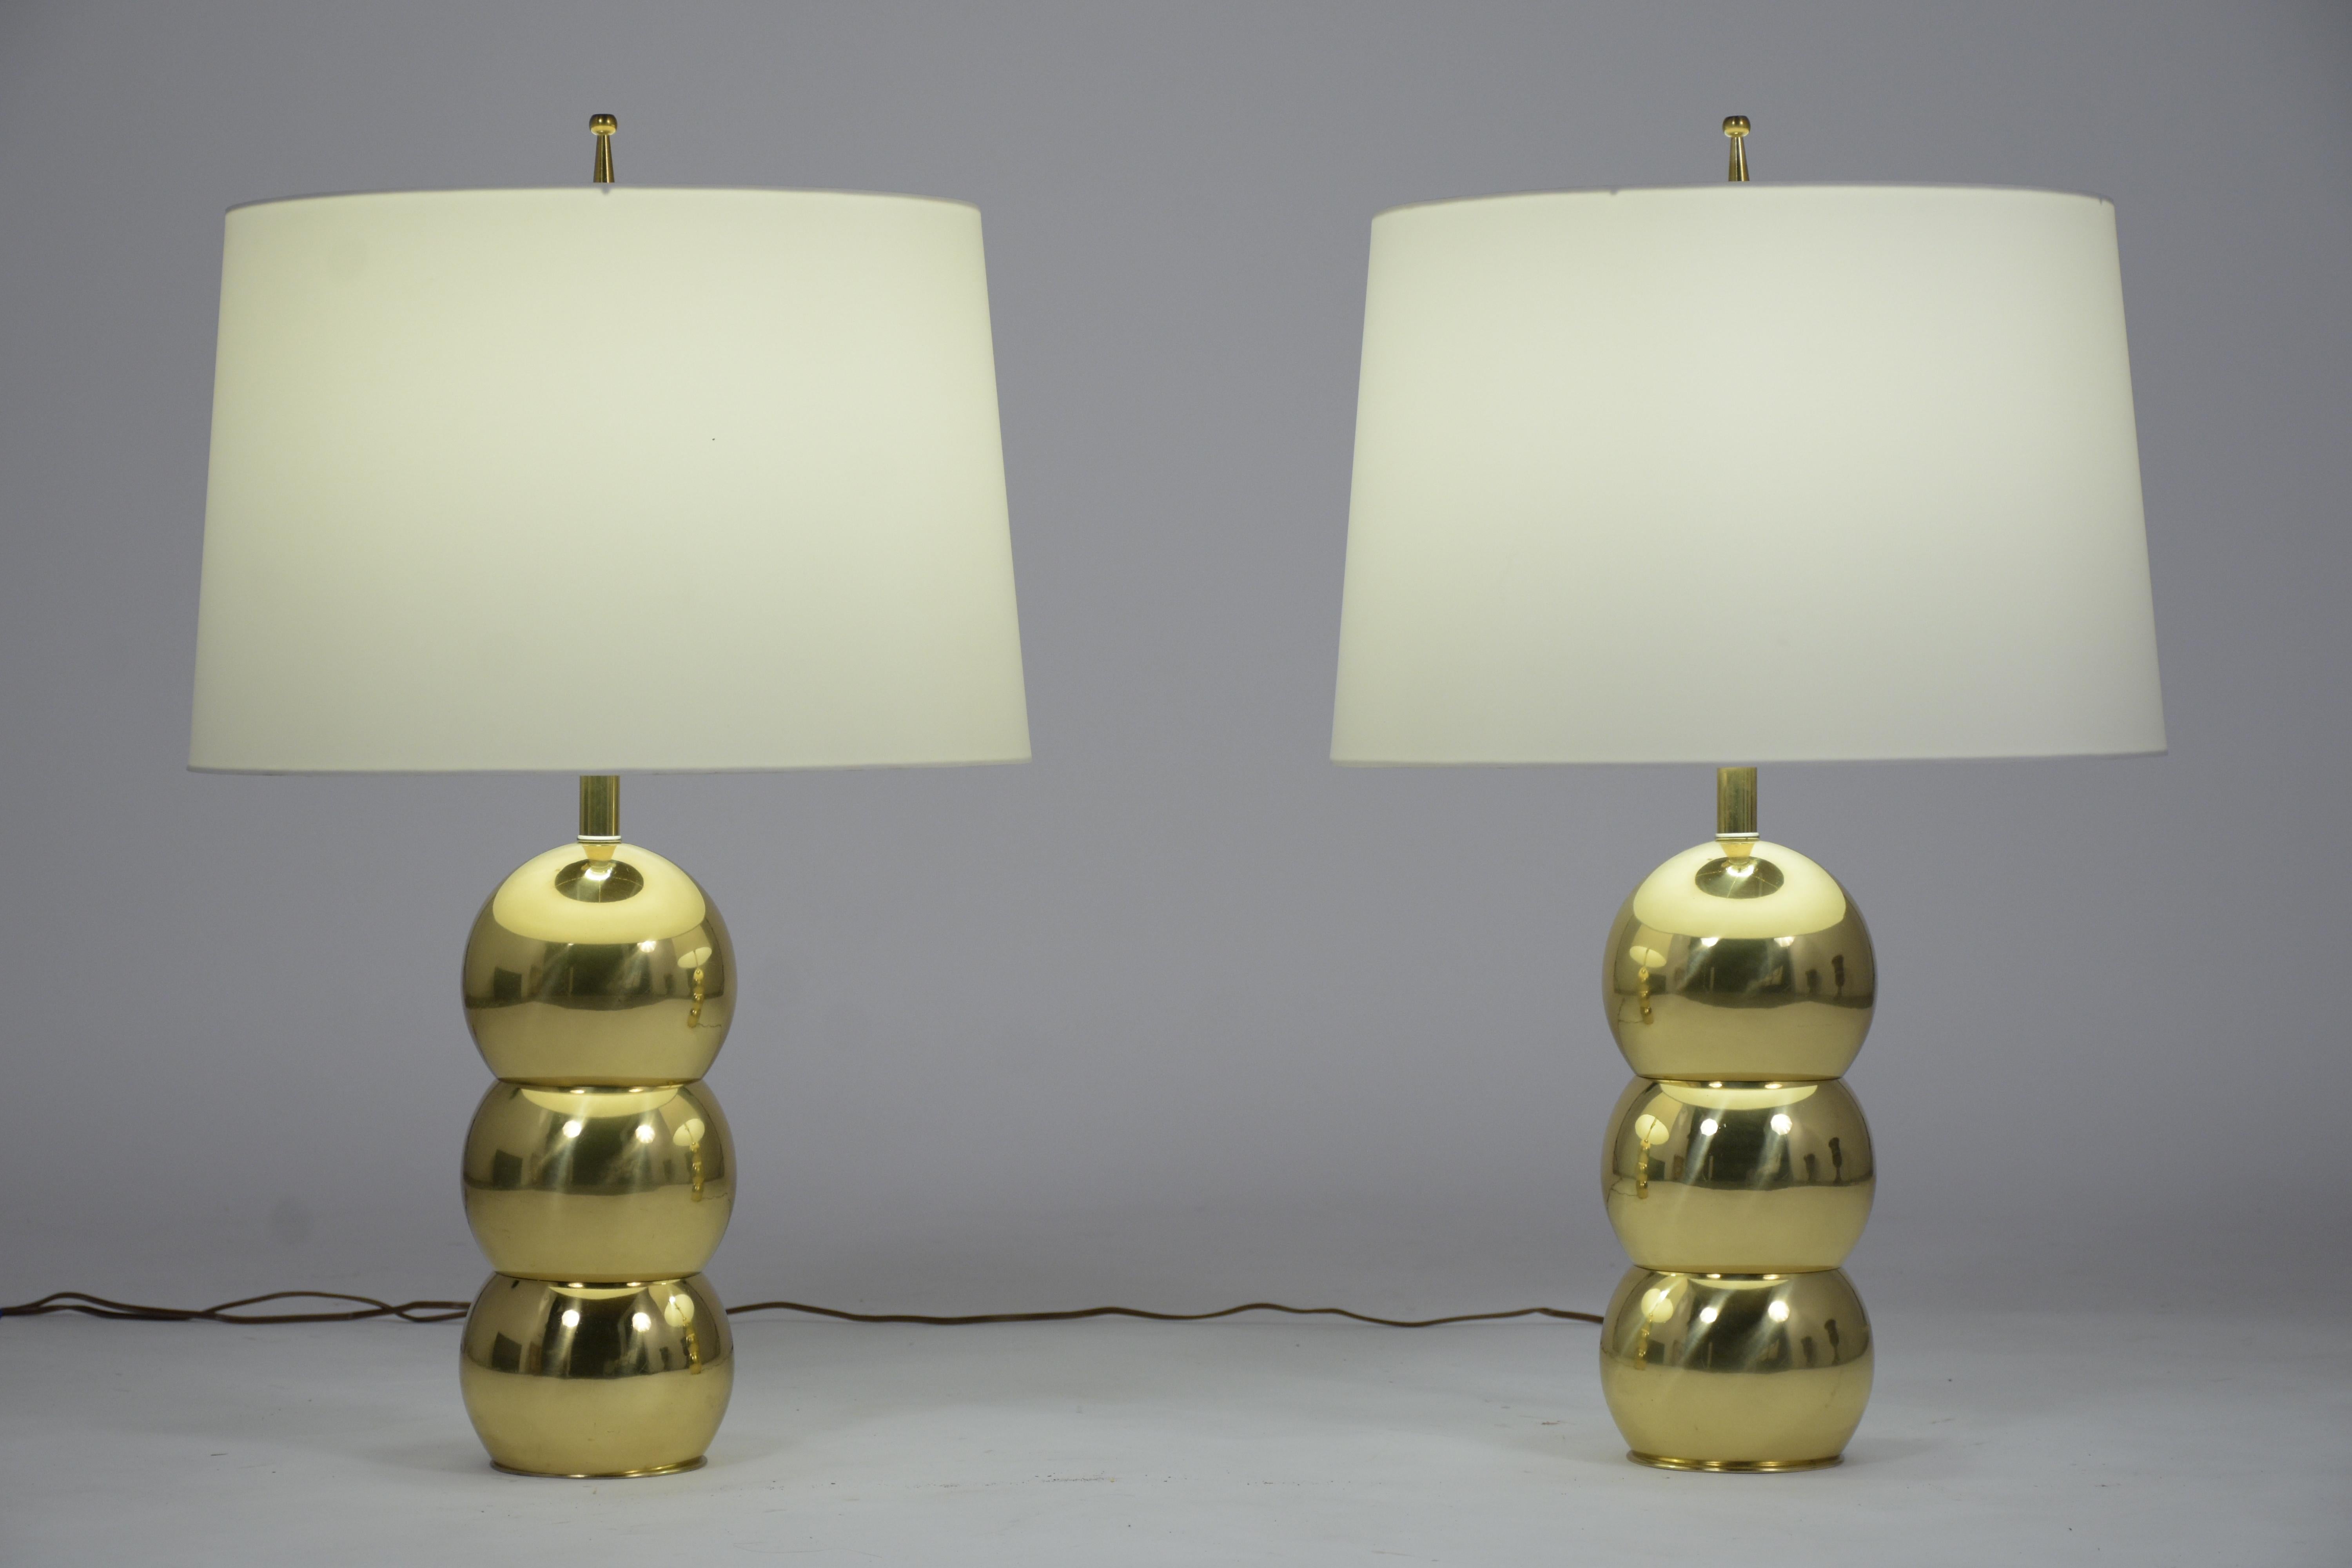 This pair of Fabulous 1960s Table Lamps are eye-catching with unique spherical brass bases and come with new white fabric lampshades. The lamp is wired to US standards and is in working condition. This pair of Vintage Mid Century Lamps are stunning